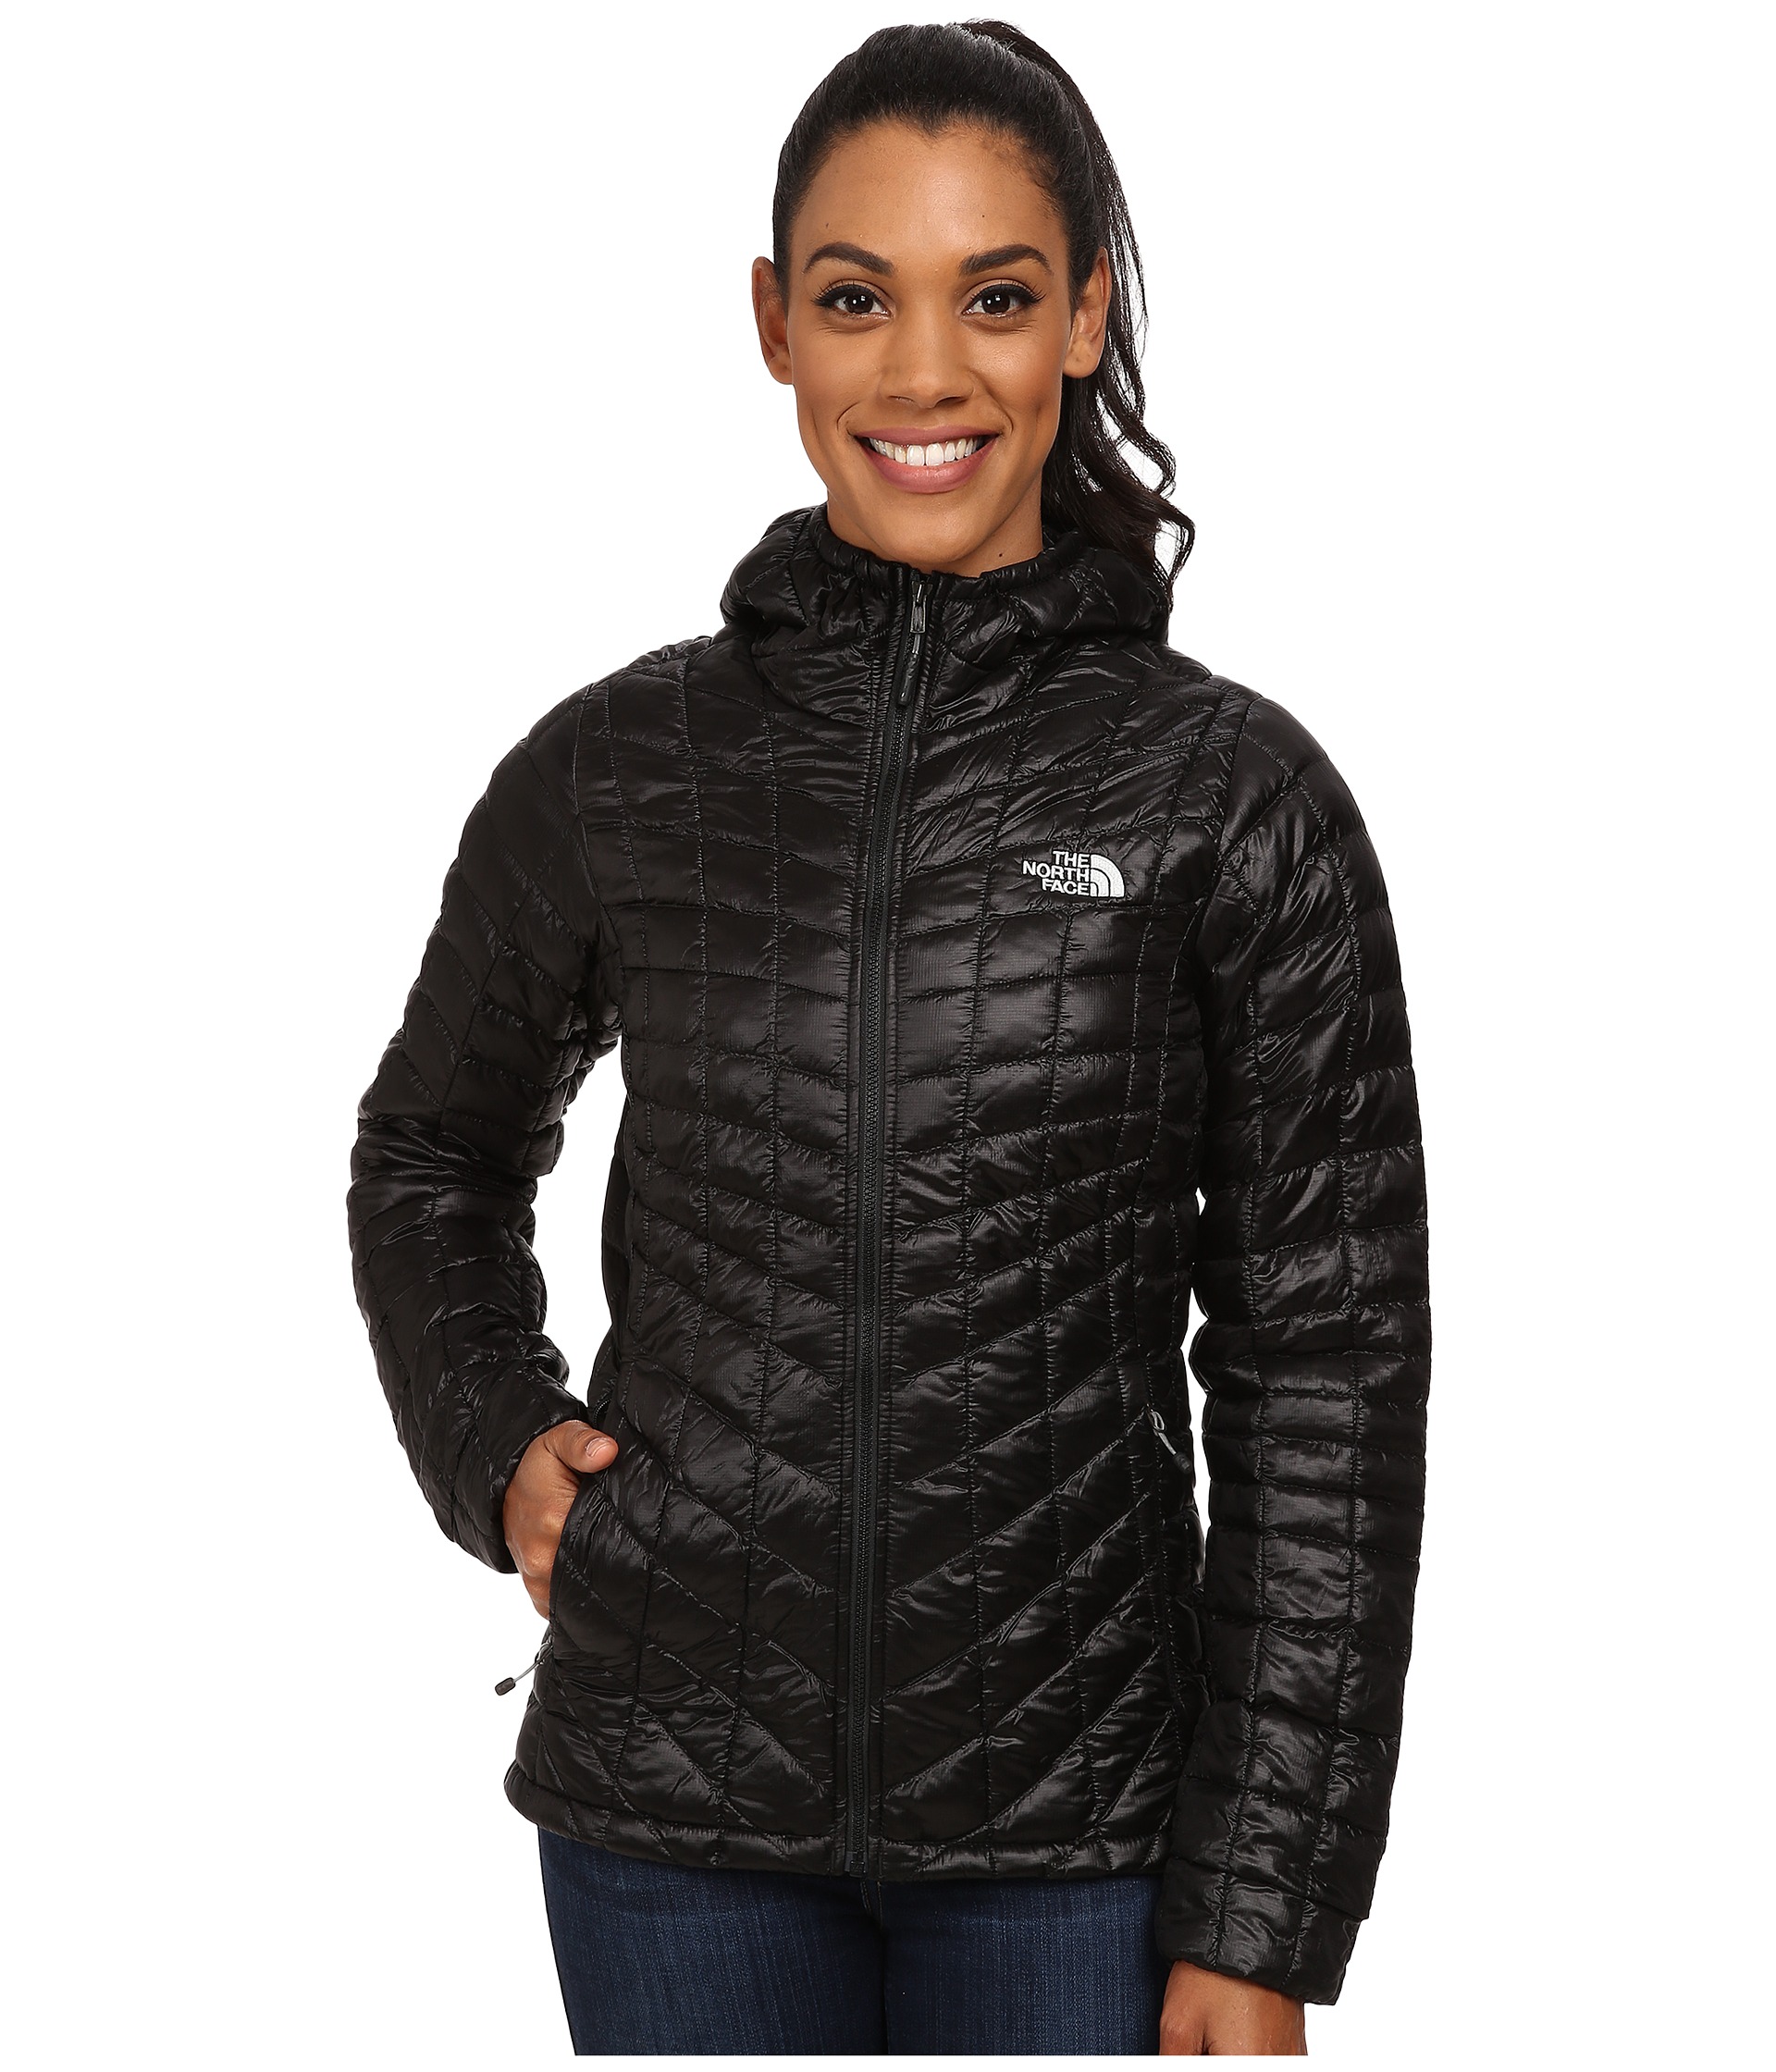 thermoball women's jacket sale